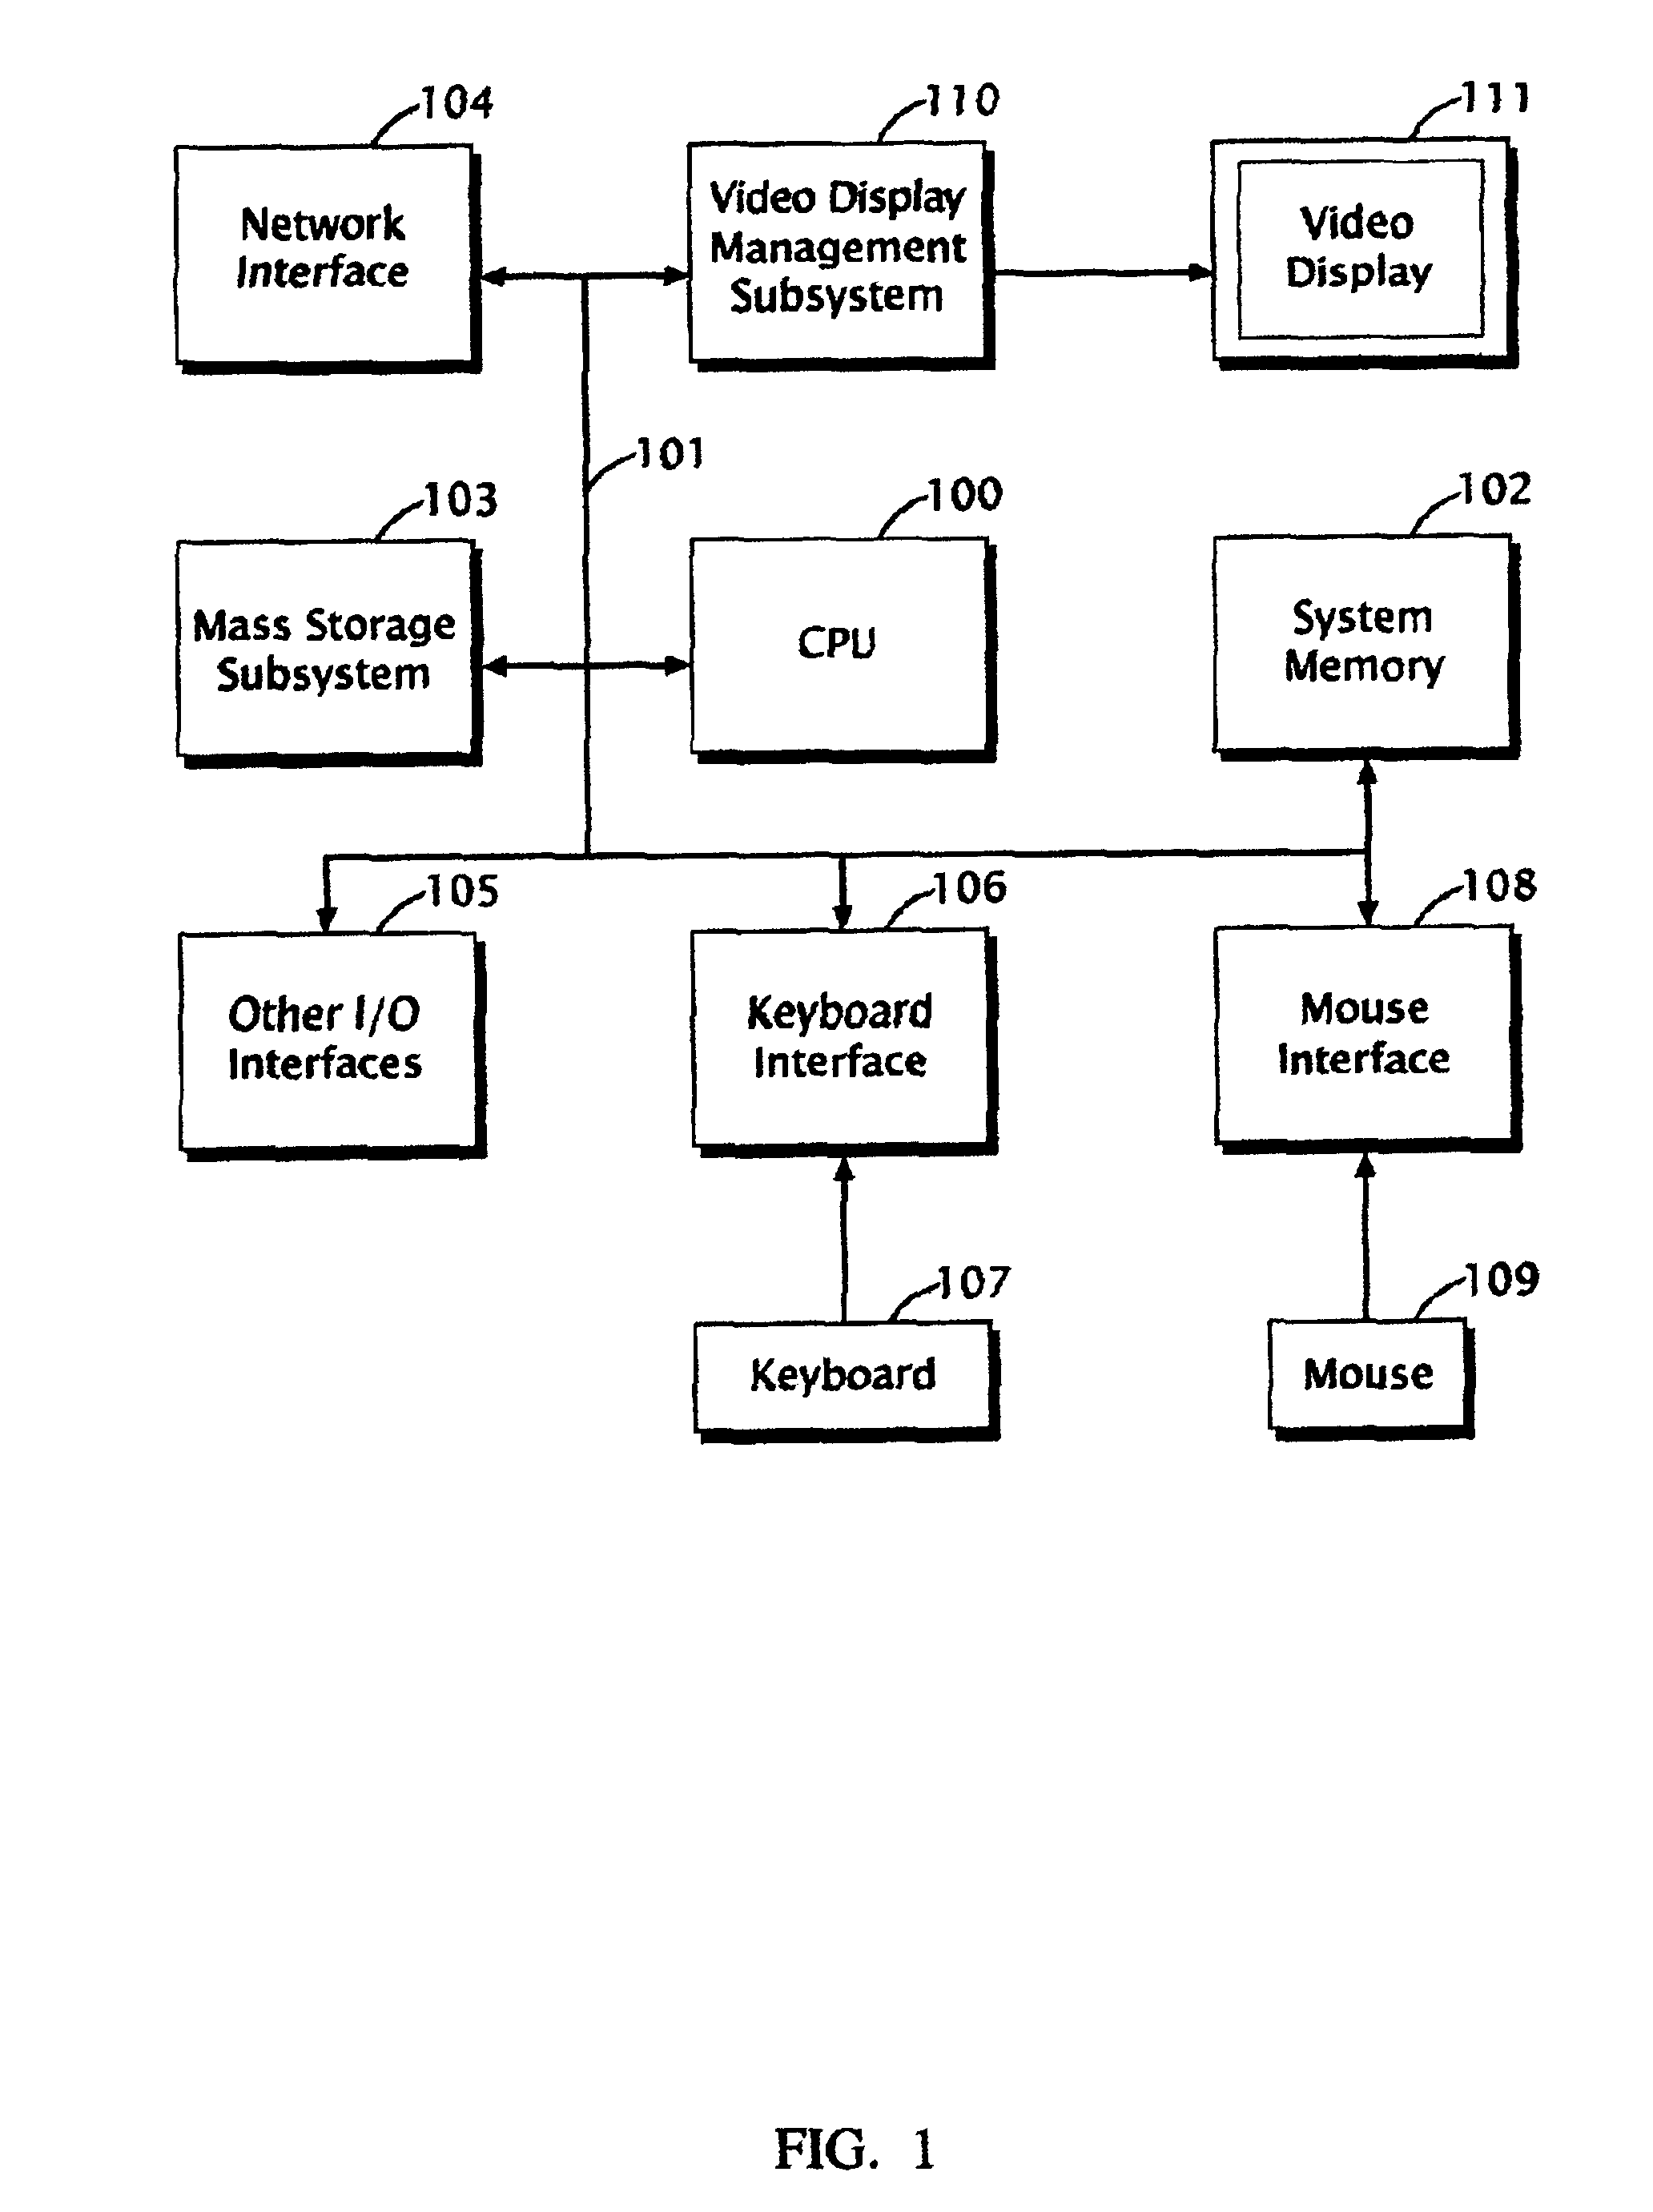 Method and apparatus for accessing information, computer programs and electronic communications across multiple computing devices using a graphical user interface